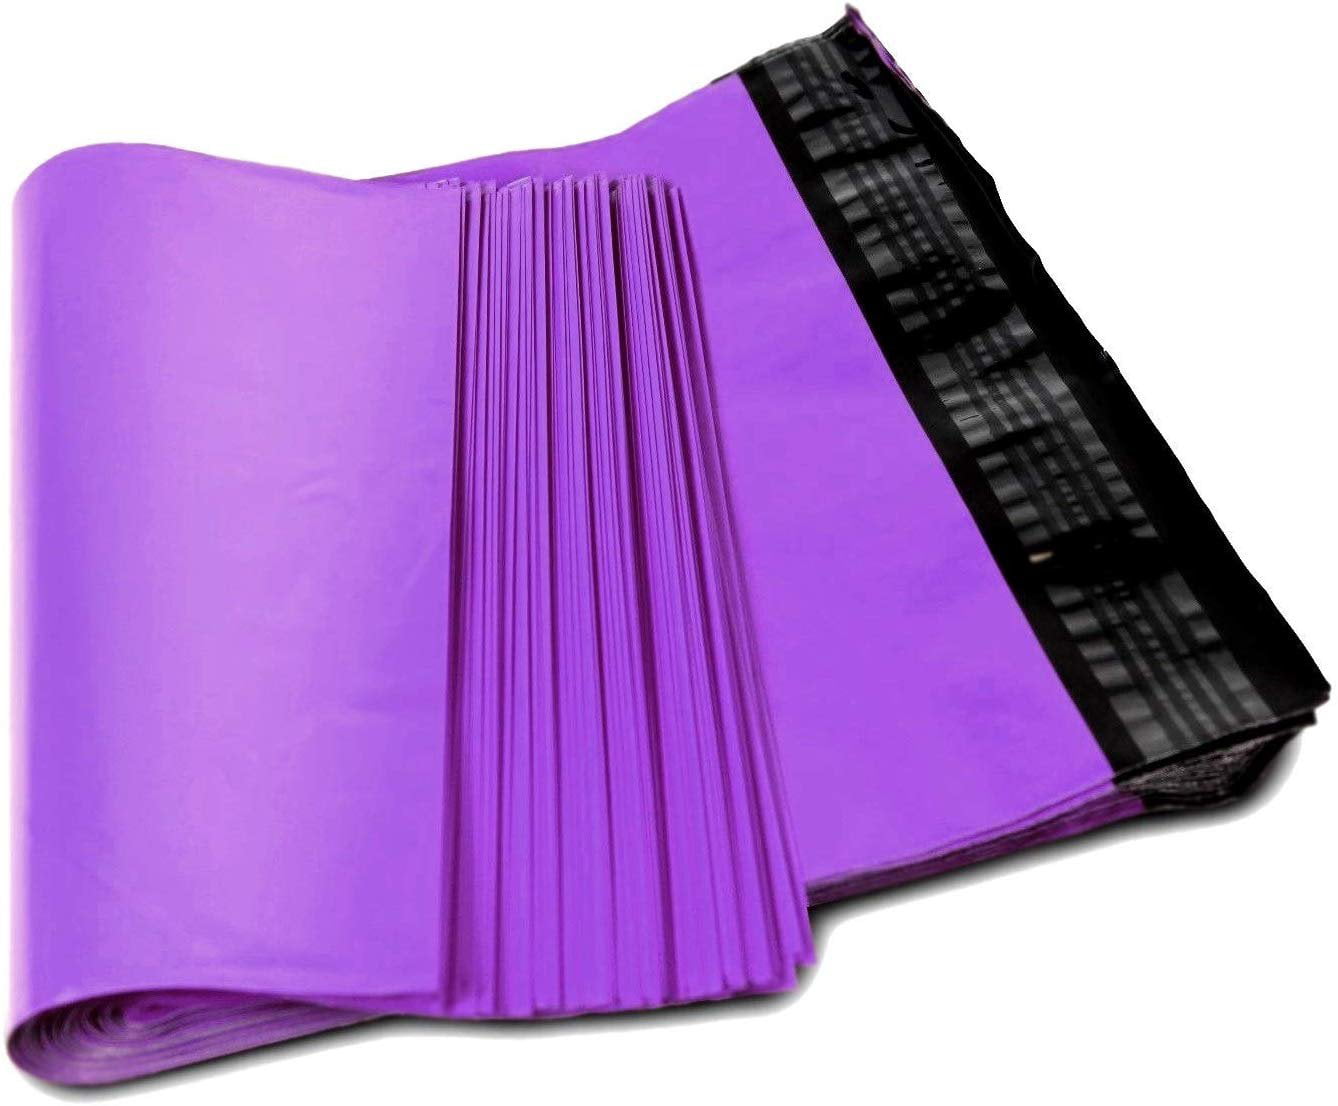 Amiff Pack of 100 Purple Poly Mailers 10 x 13 Multipurpose Shipping Bags 10x13 Peel and Seal Closure 2 mil Thick Waterproof Envelopes for Mailing Wrapping Packing and Lightweight Packaging